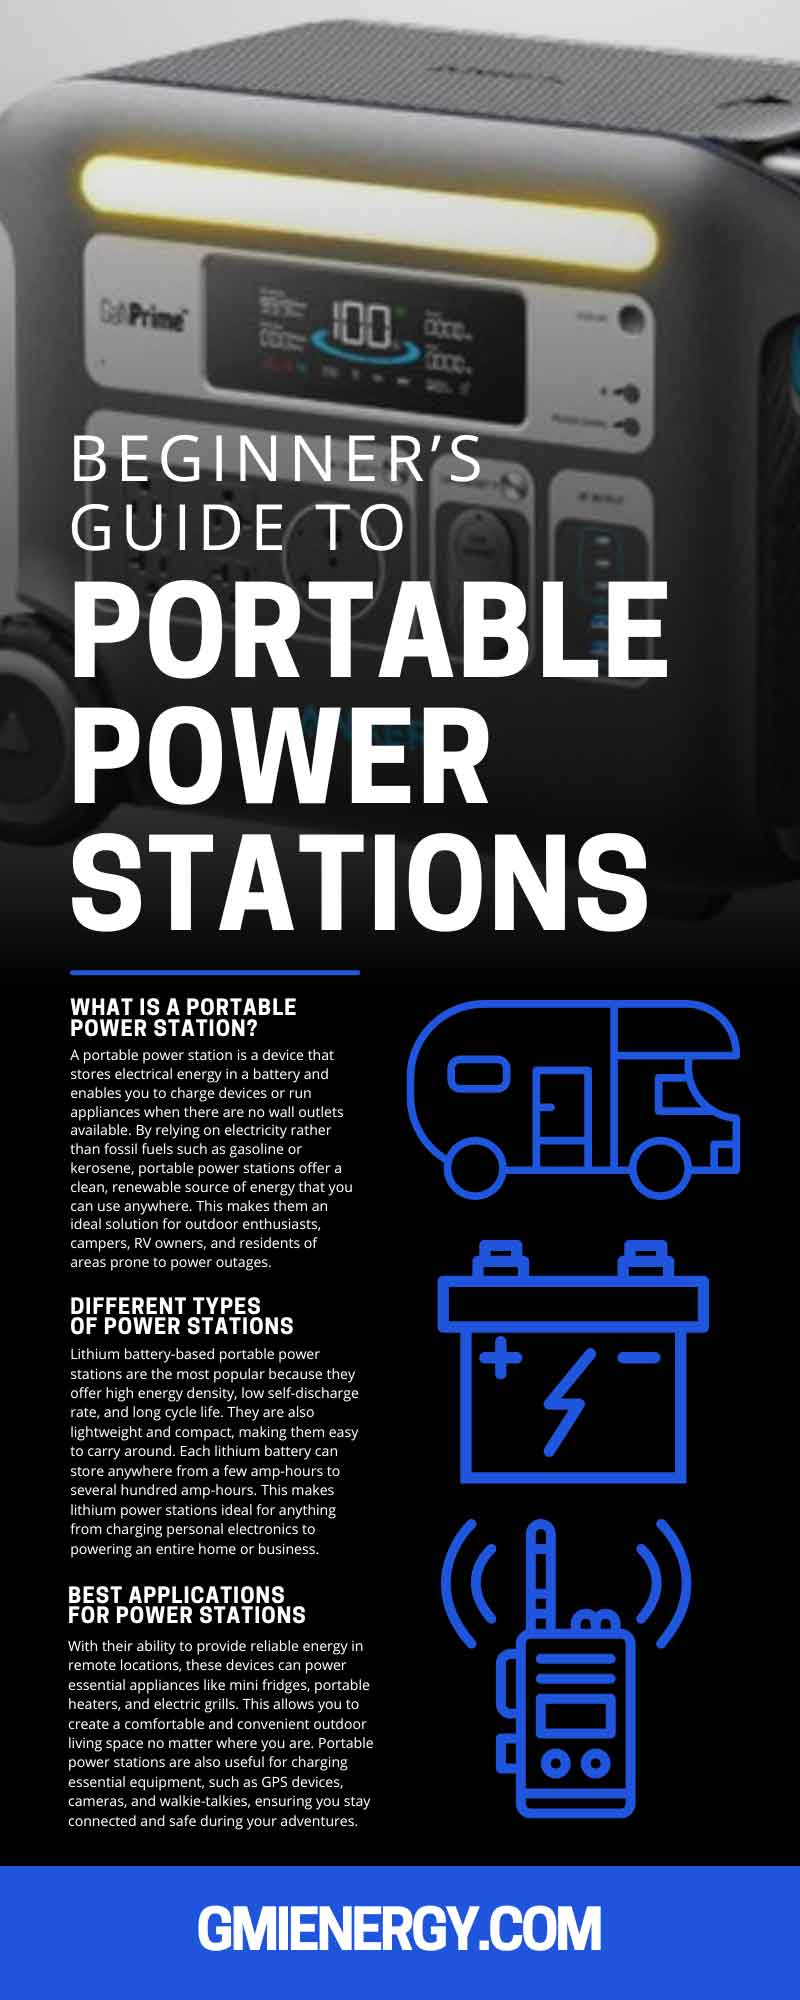 Beginner’s Guide to Portable Power Stations